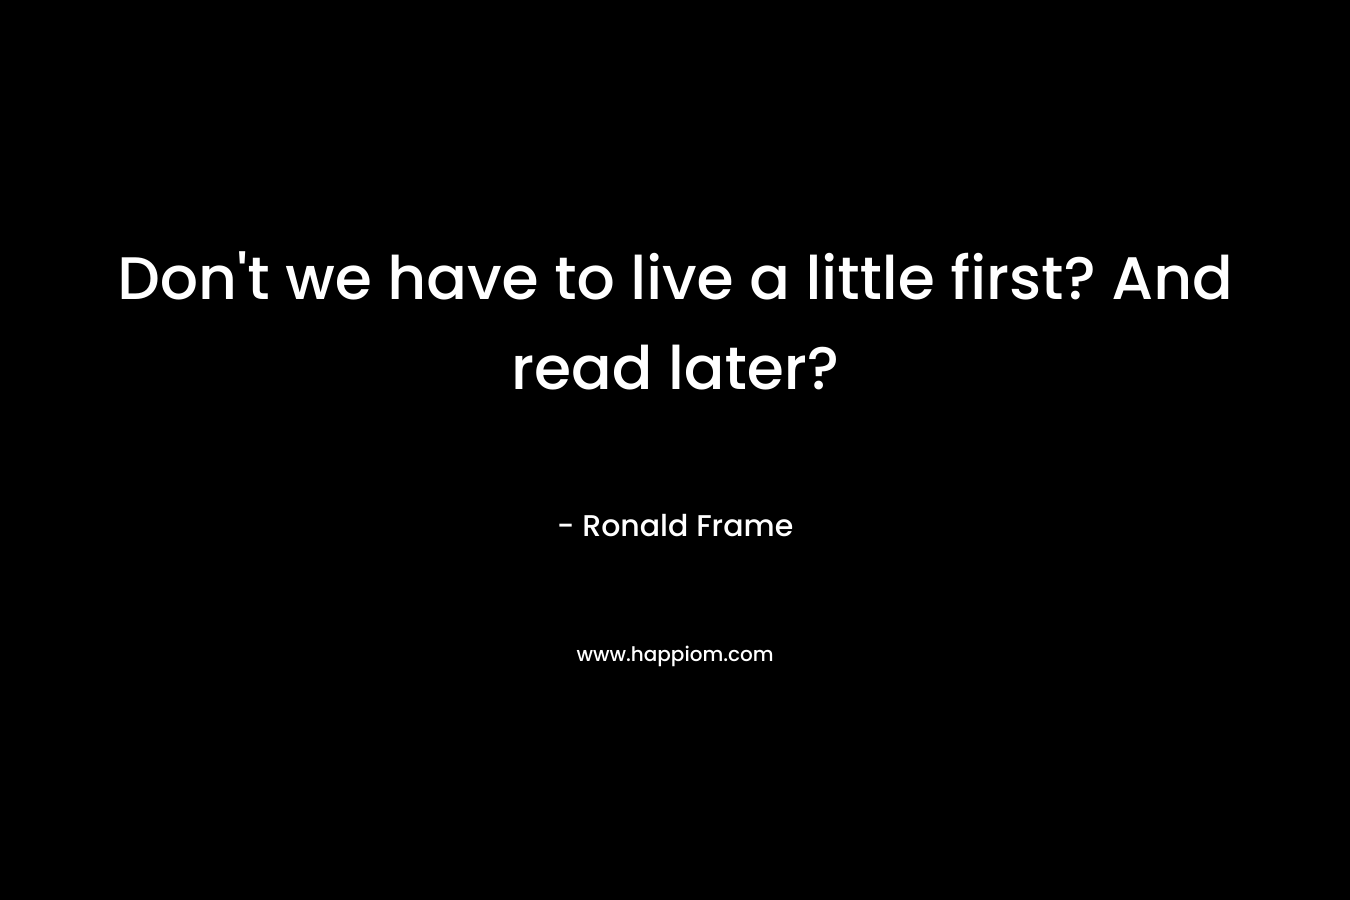 Don't we have to live a little first? And read later?